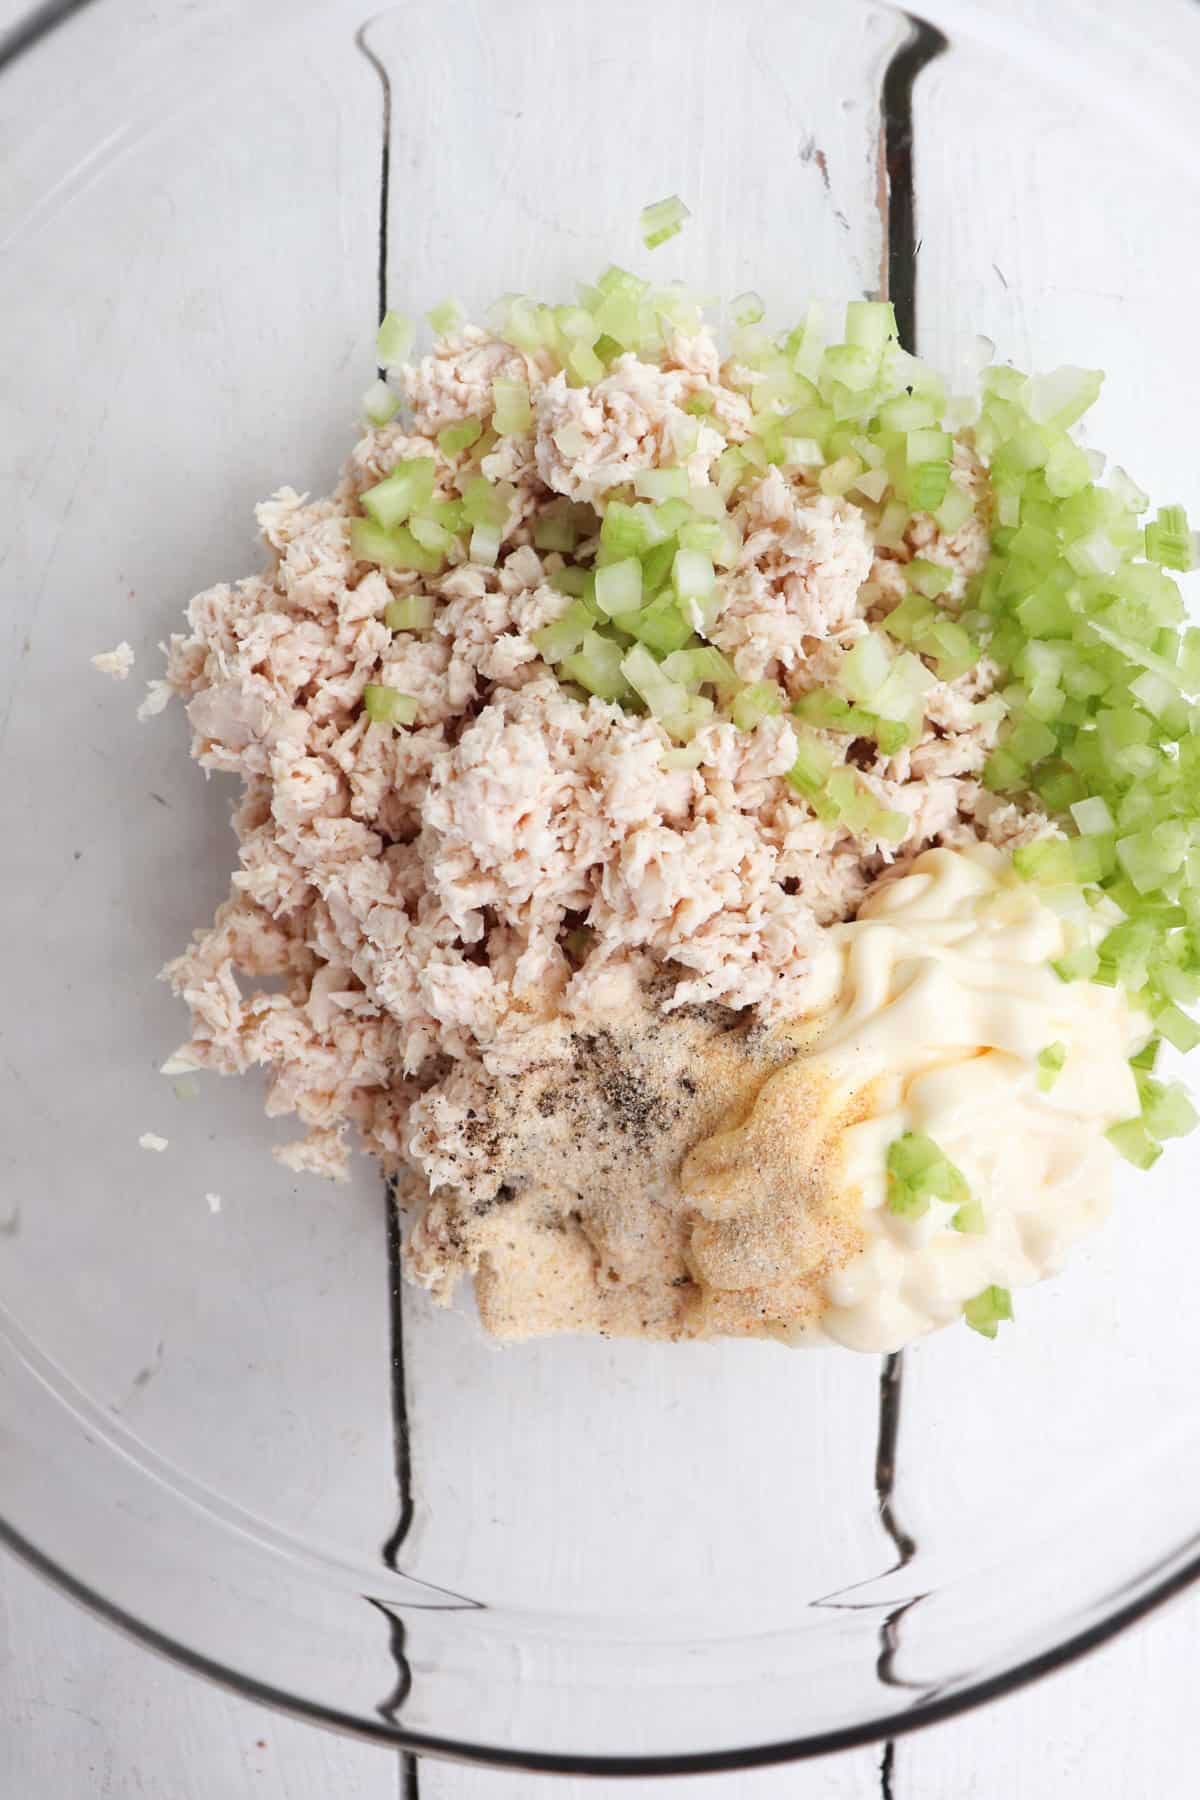 prepared ingredients for chicken salad in clear bowl unmixed.